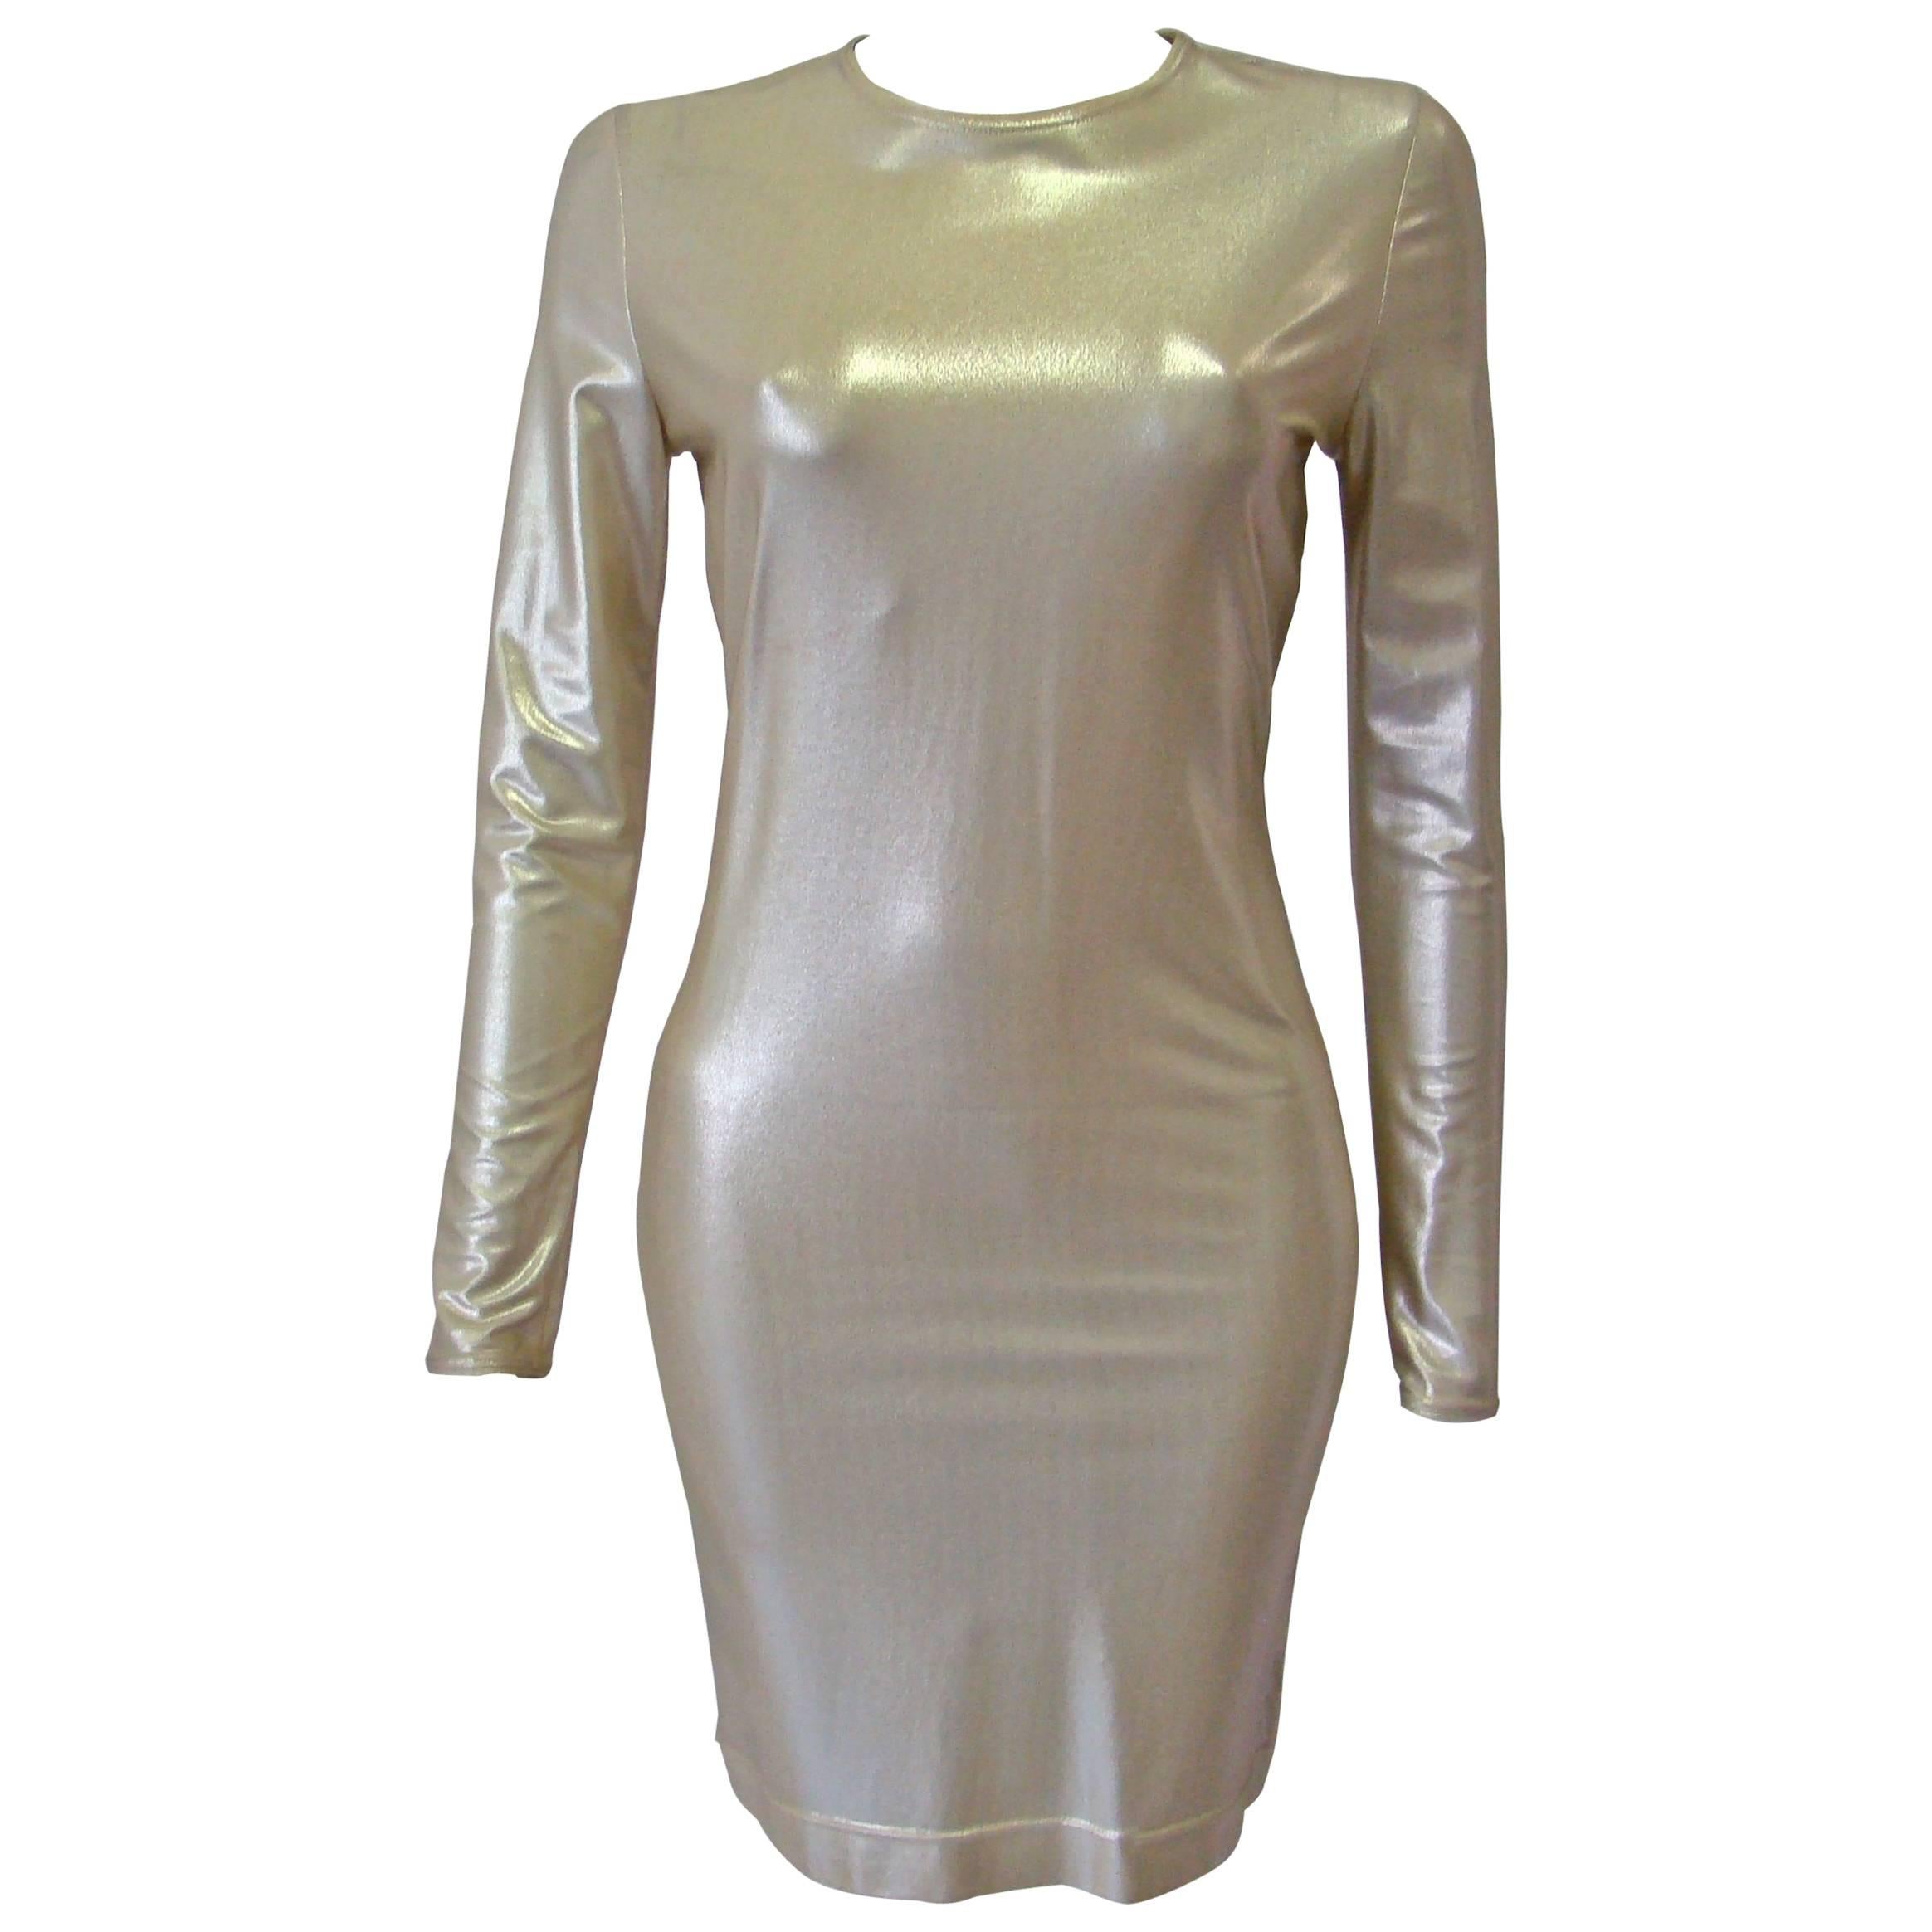 Very Rare Gianni Versace Couture Gold Stretch Dress Fall 1994 For Sale